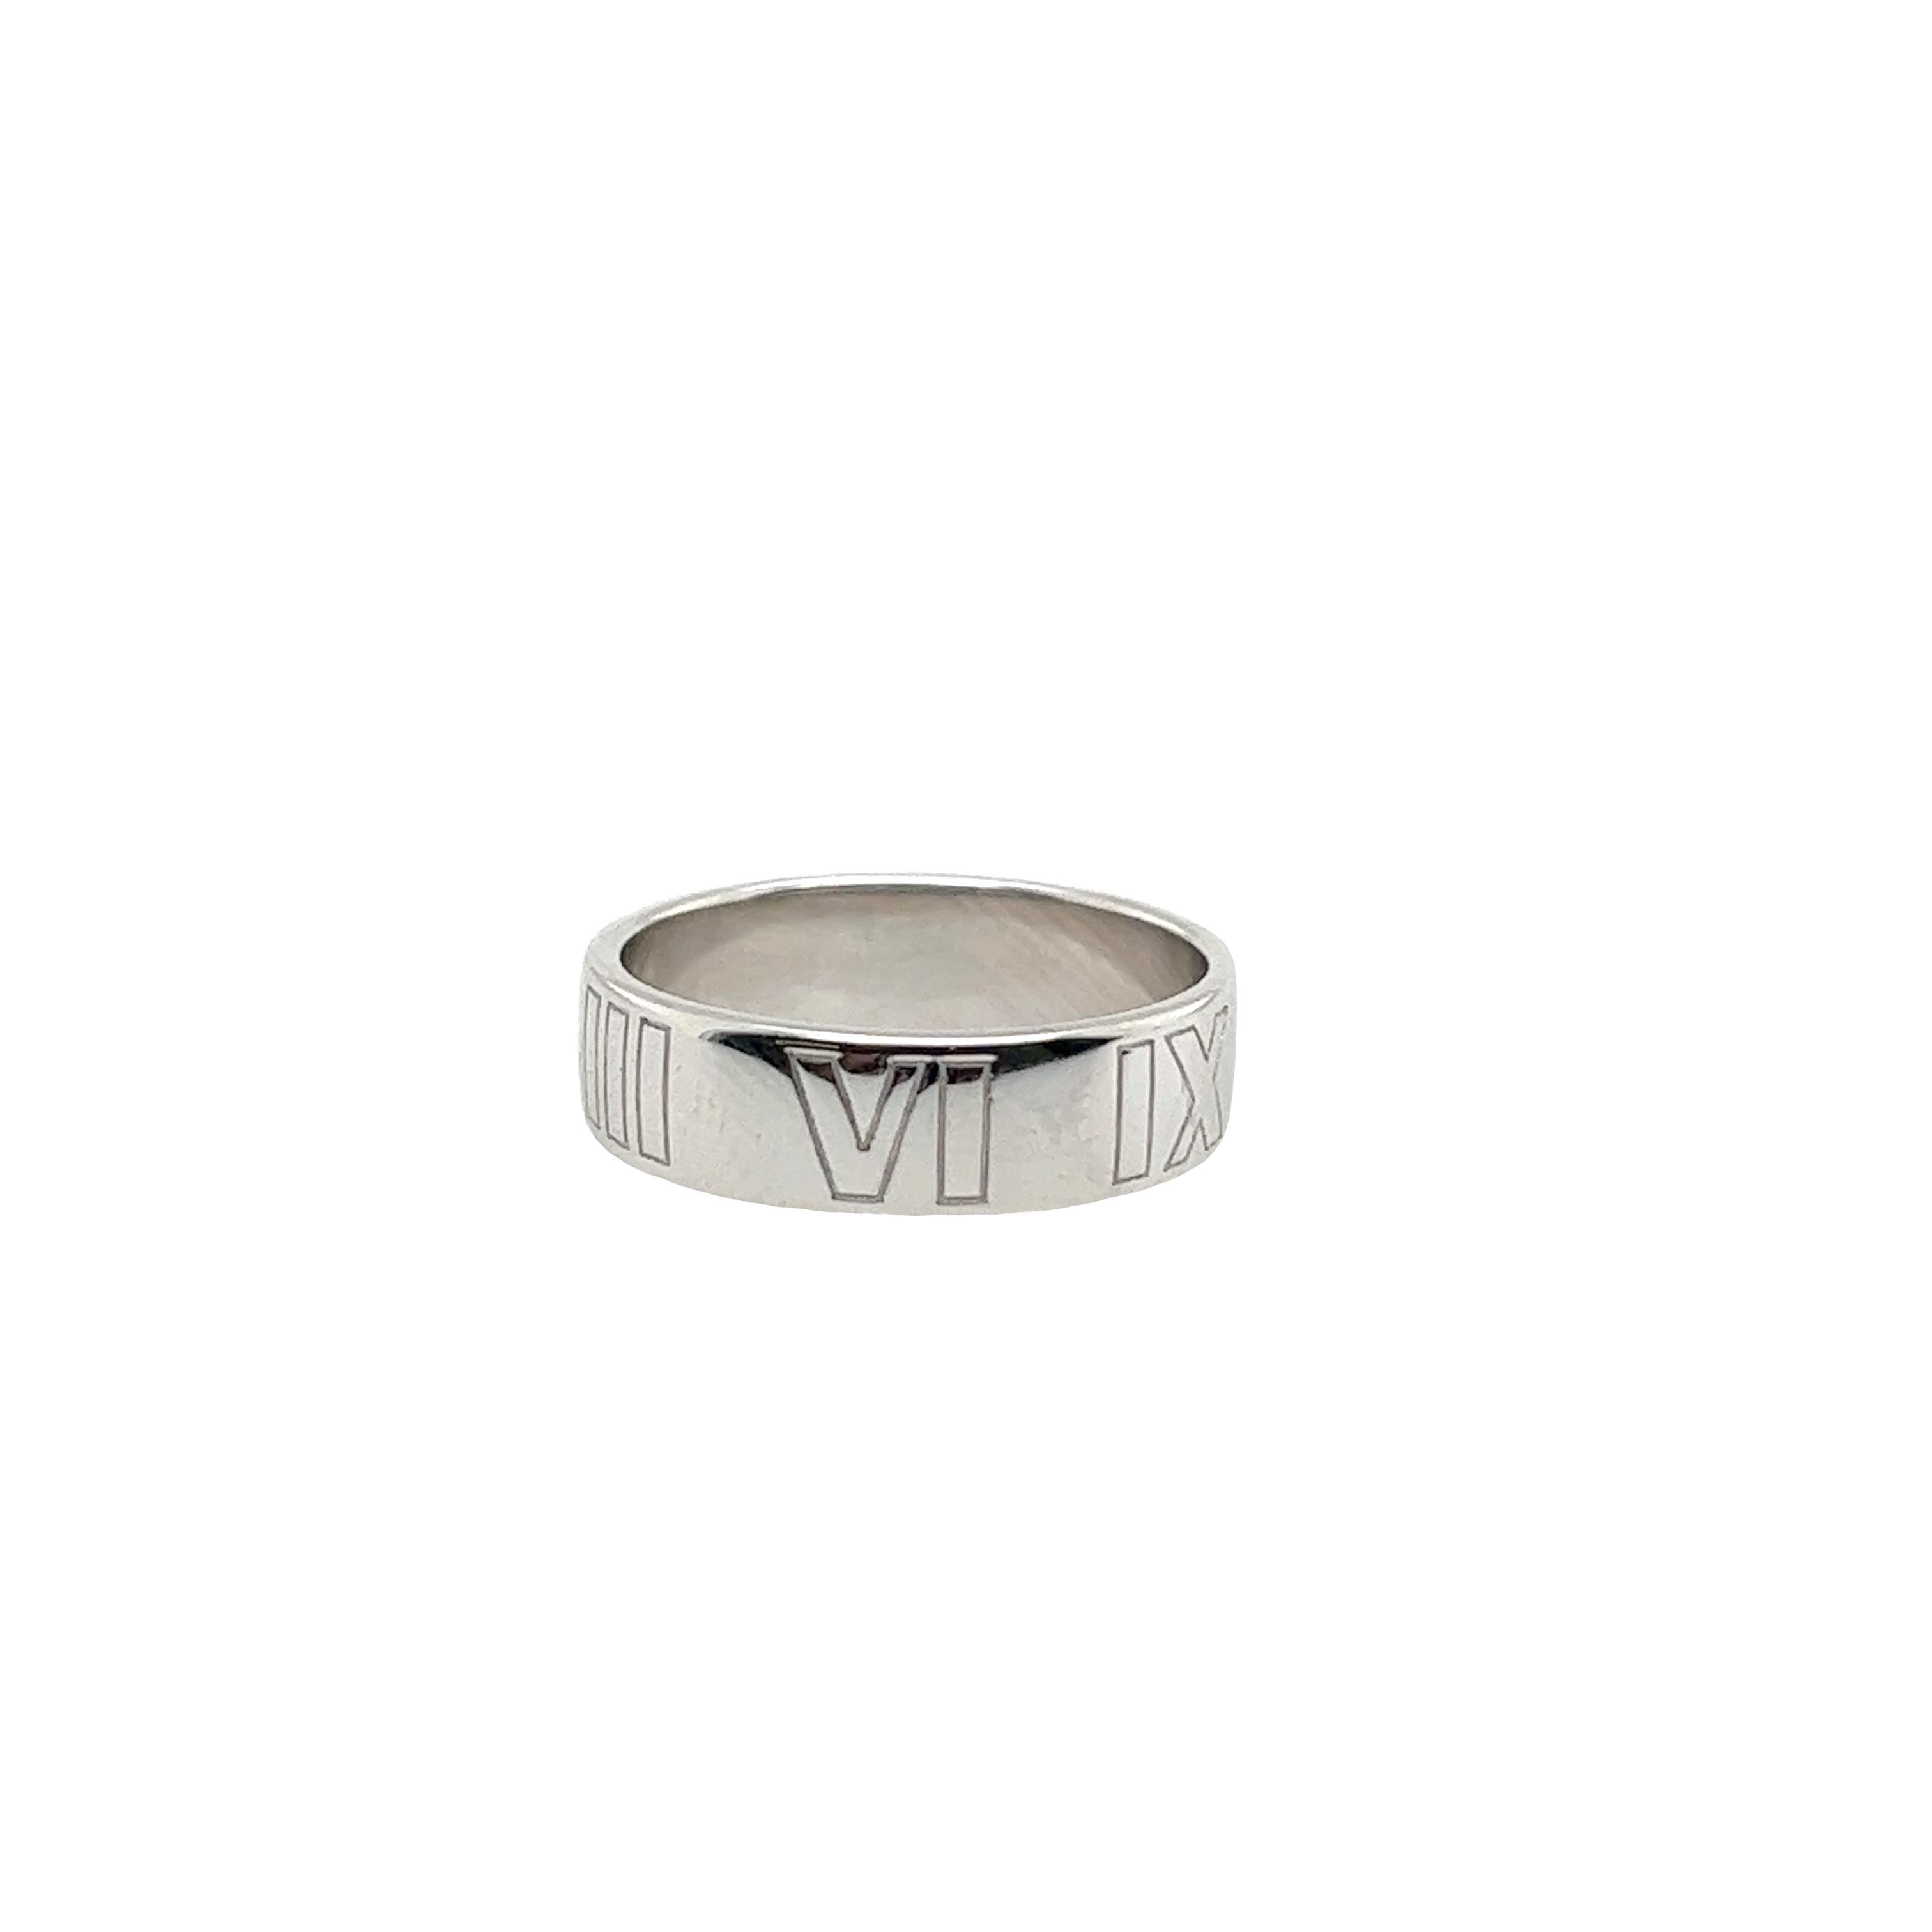 Radiating sophistication and modernity, the Tiffany & Co. Atlas Diamond Band Ring is crafted in 18ct white gold. Adorned with diamonds, its sleek design embodies the essence of the iconic Atlas collection, symbolizing strength, elegance, and